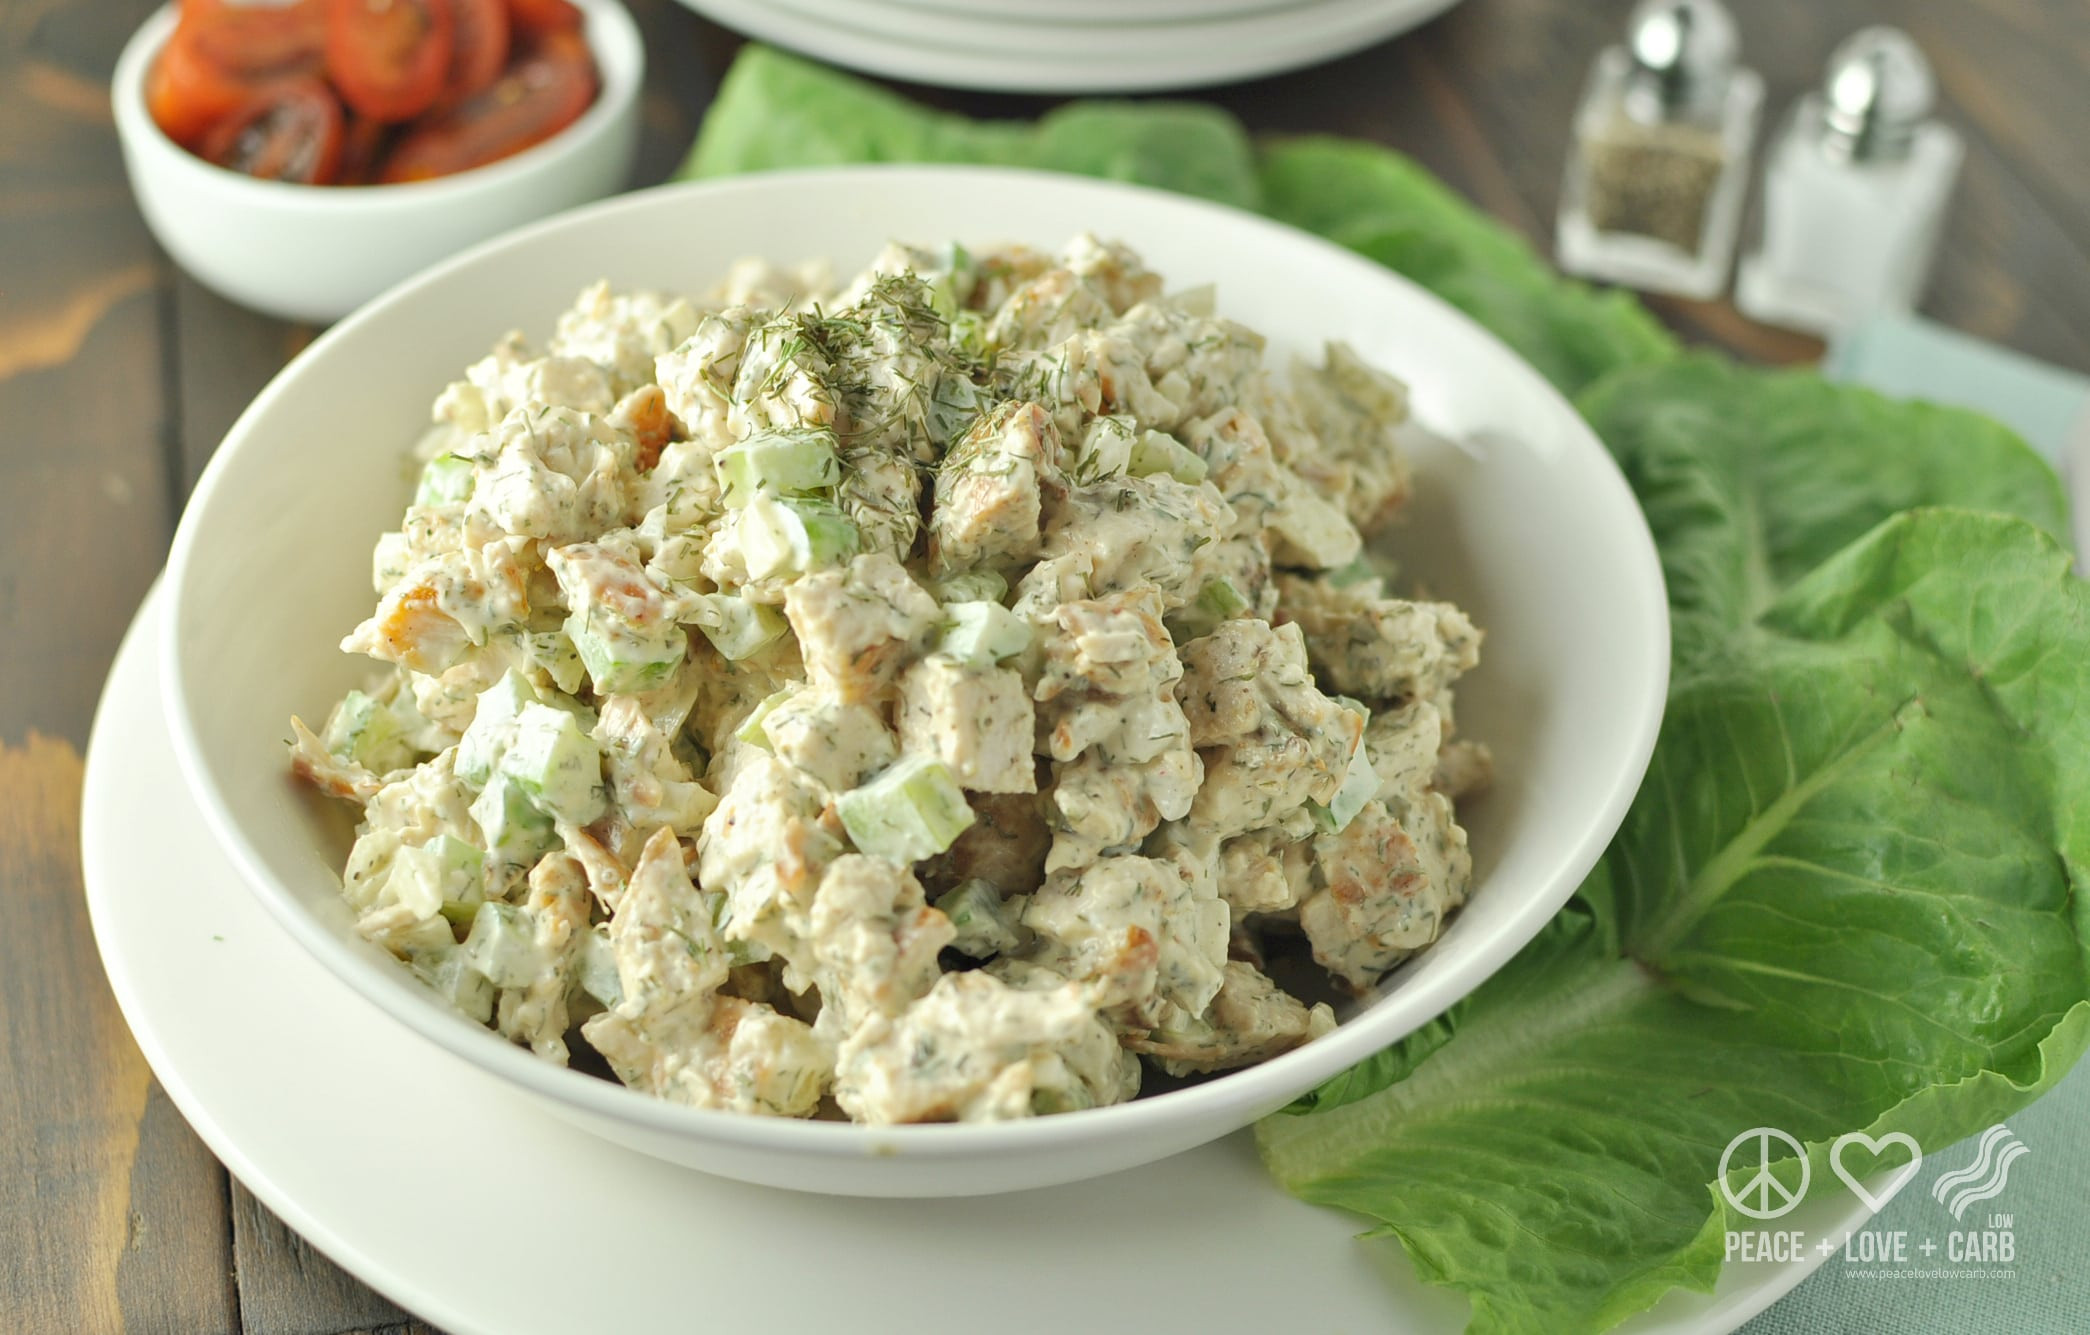 Low Carb Chicken Salad Recipe
 Dill Chicken Salad Low Carb Paleo